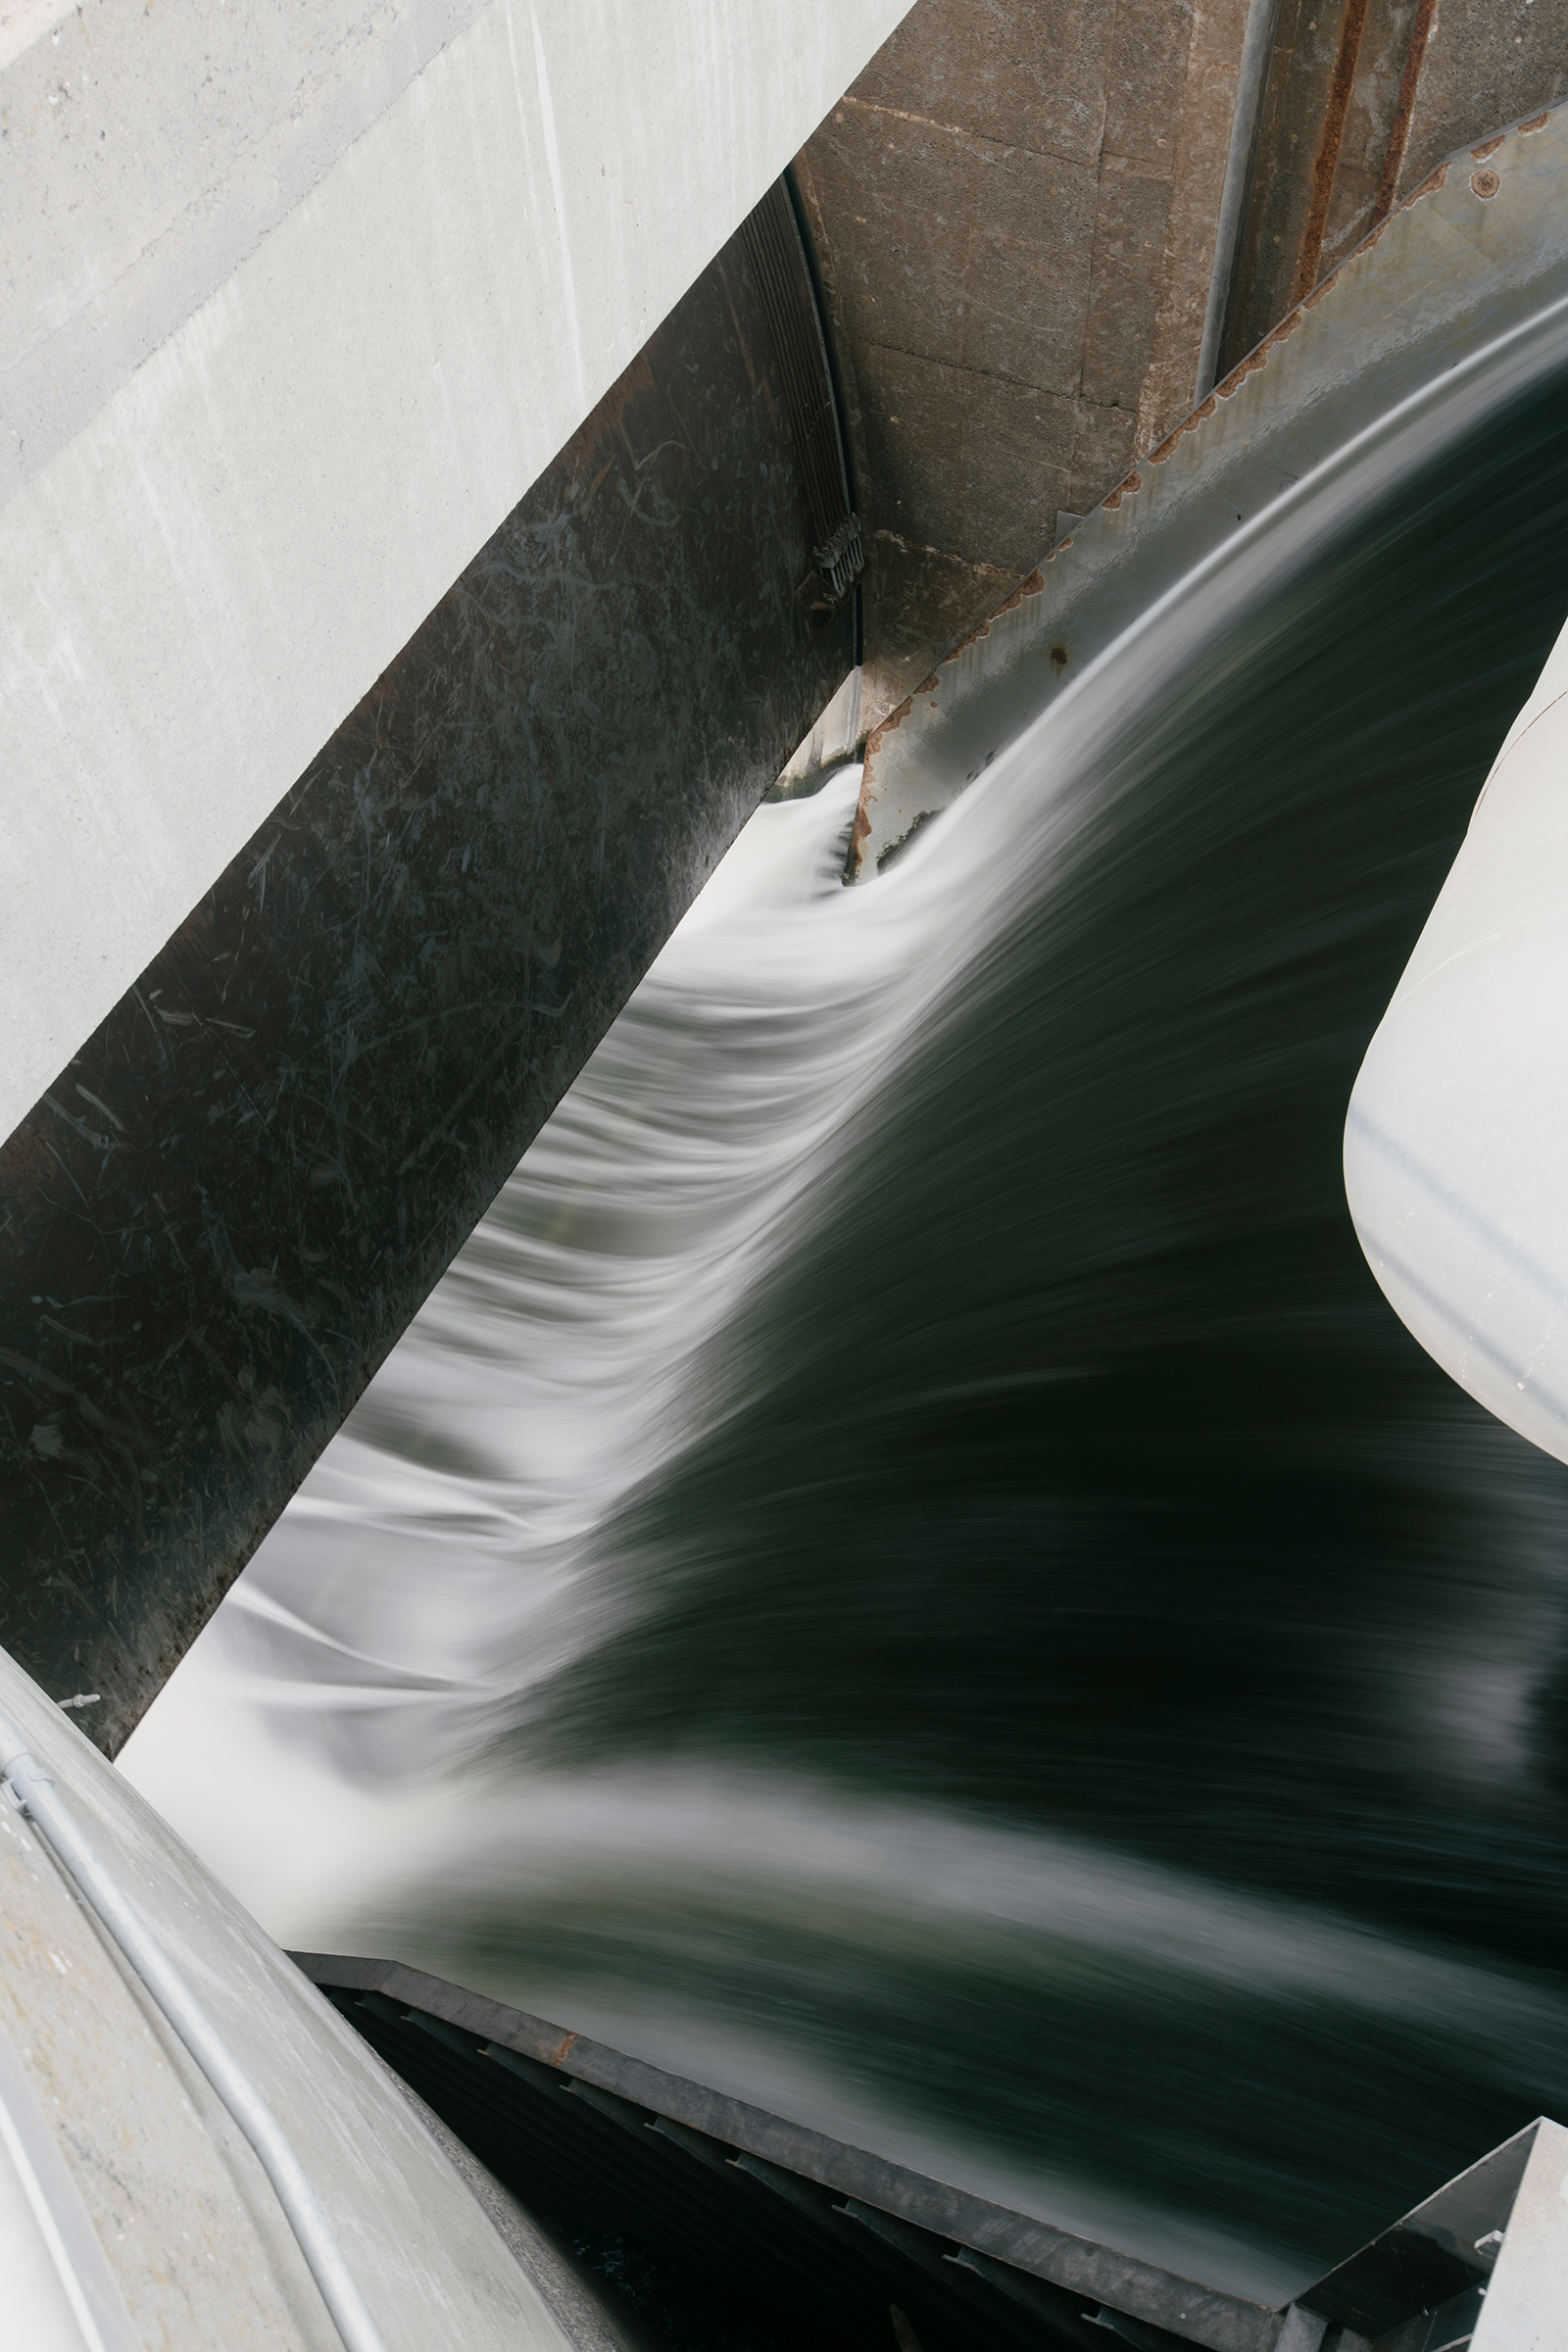 The spillway at Lower Granite dam, specially designed to allow salmon to pass with less stress from pressure changes as they pass go through the dam, on their way downriver.